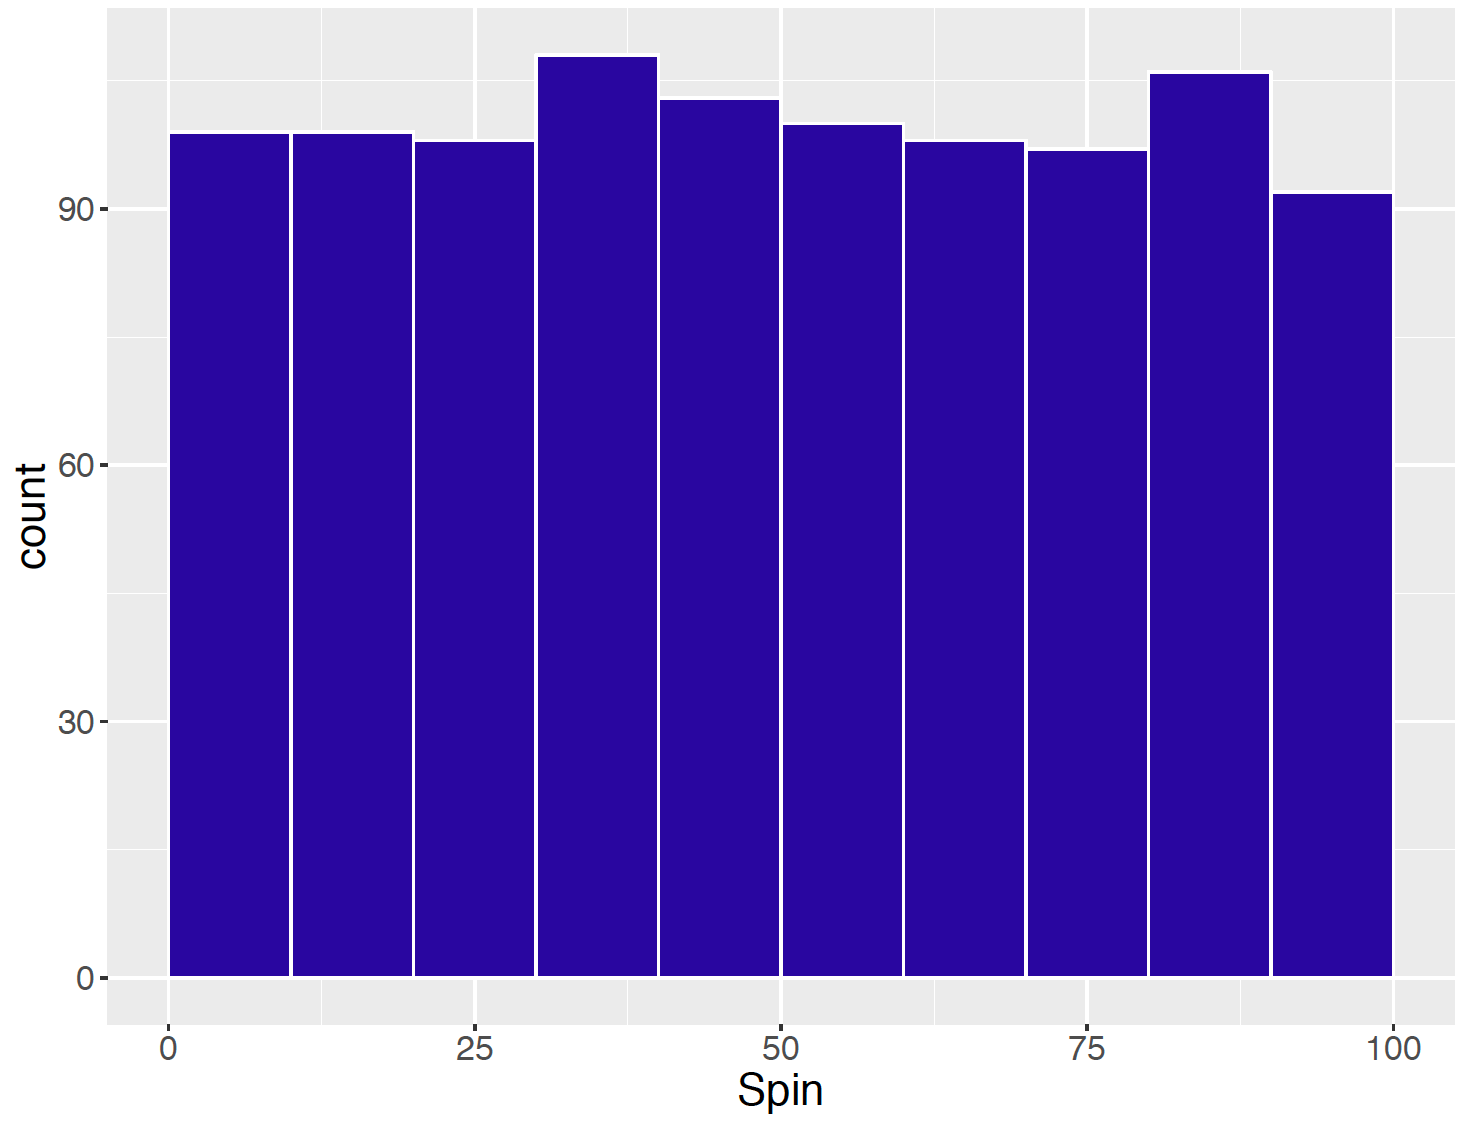 Histogram of 1000 simulated values of the spinner.